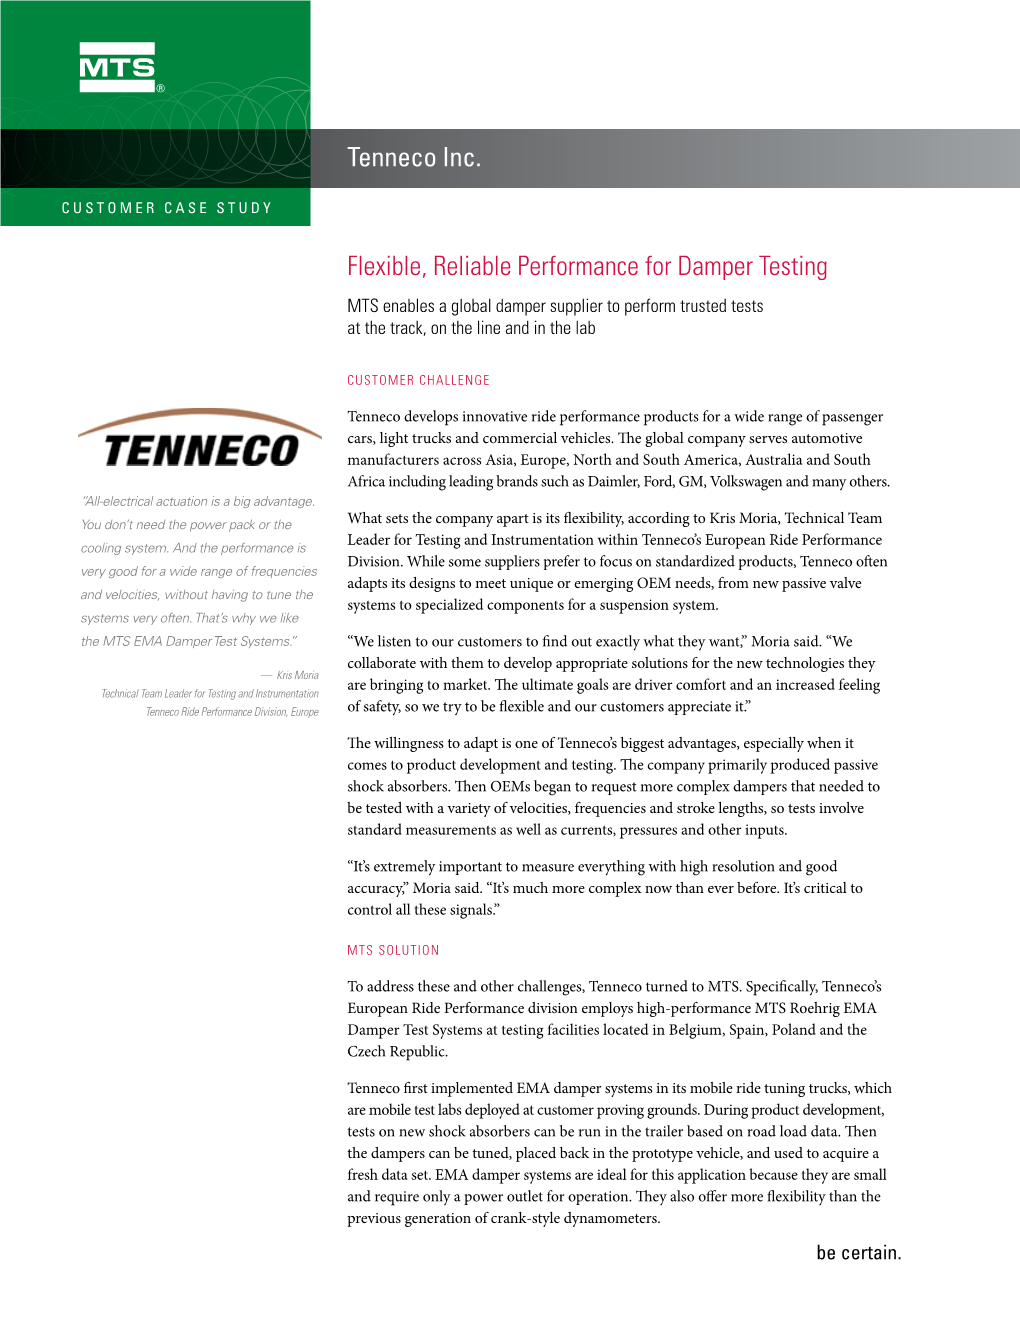 Tenneco Inc. Flexible, Reliable Performance for Damper Testing